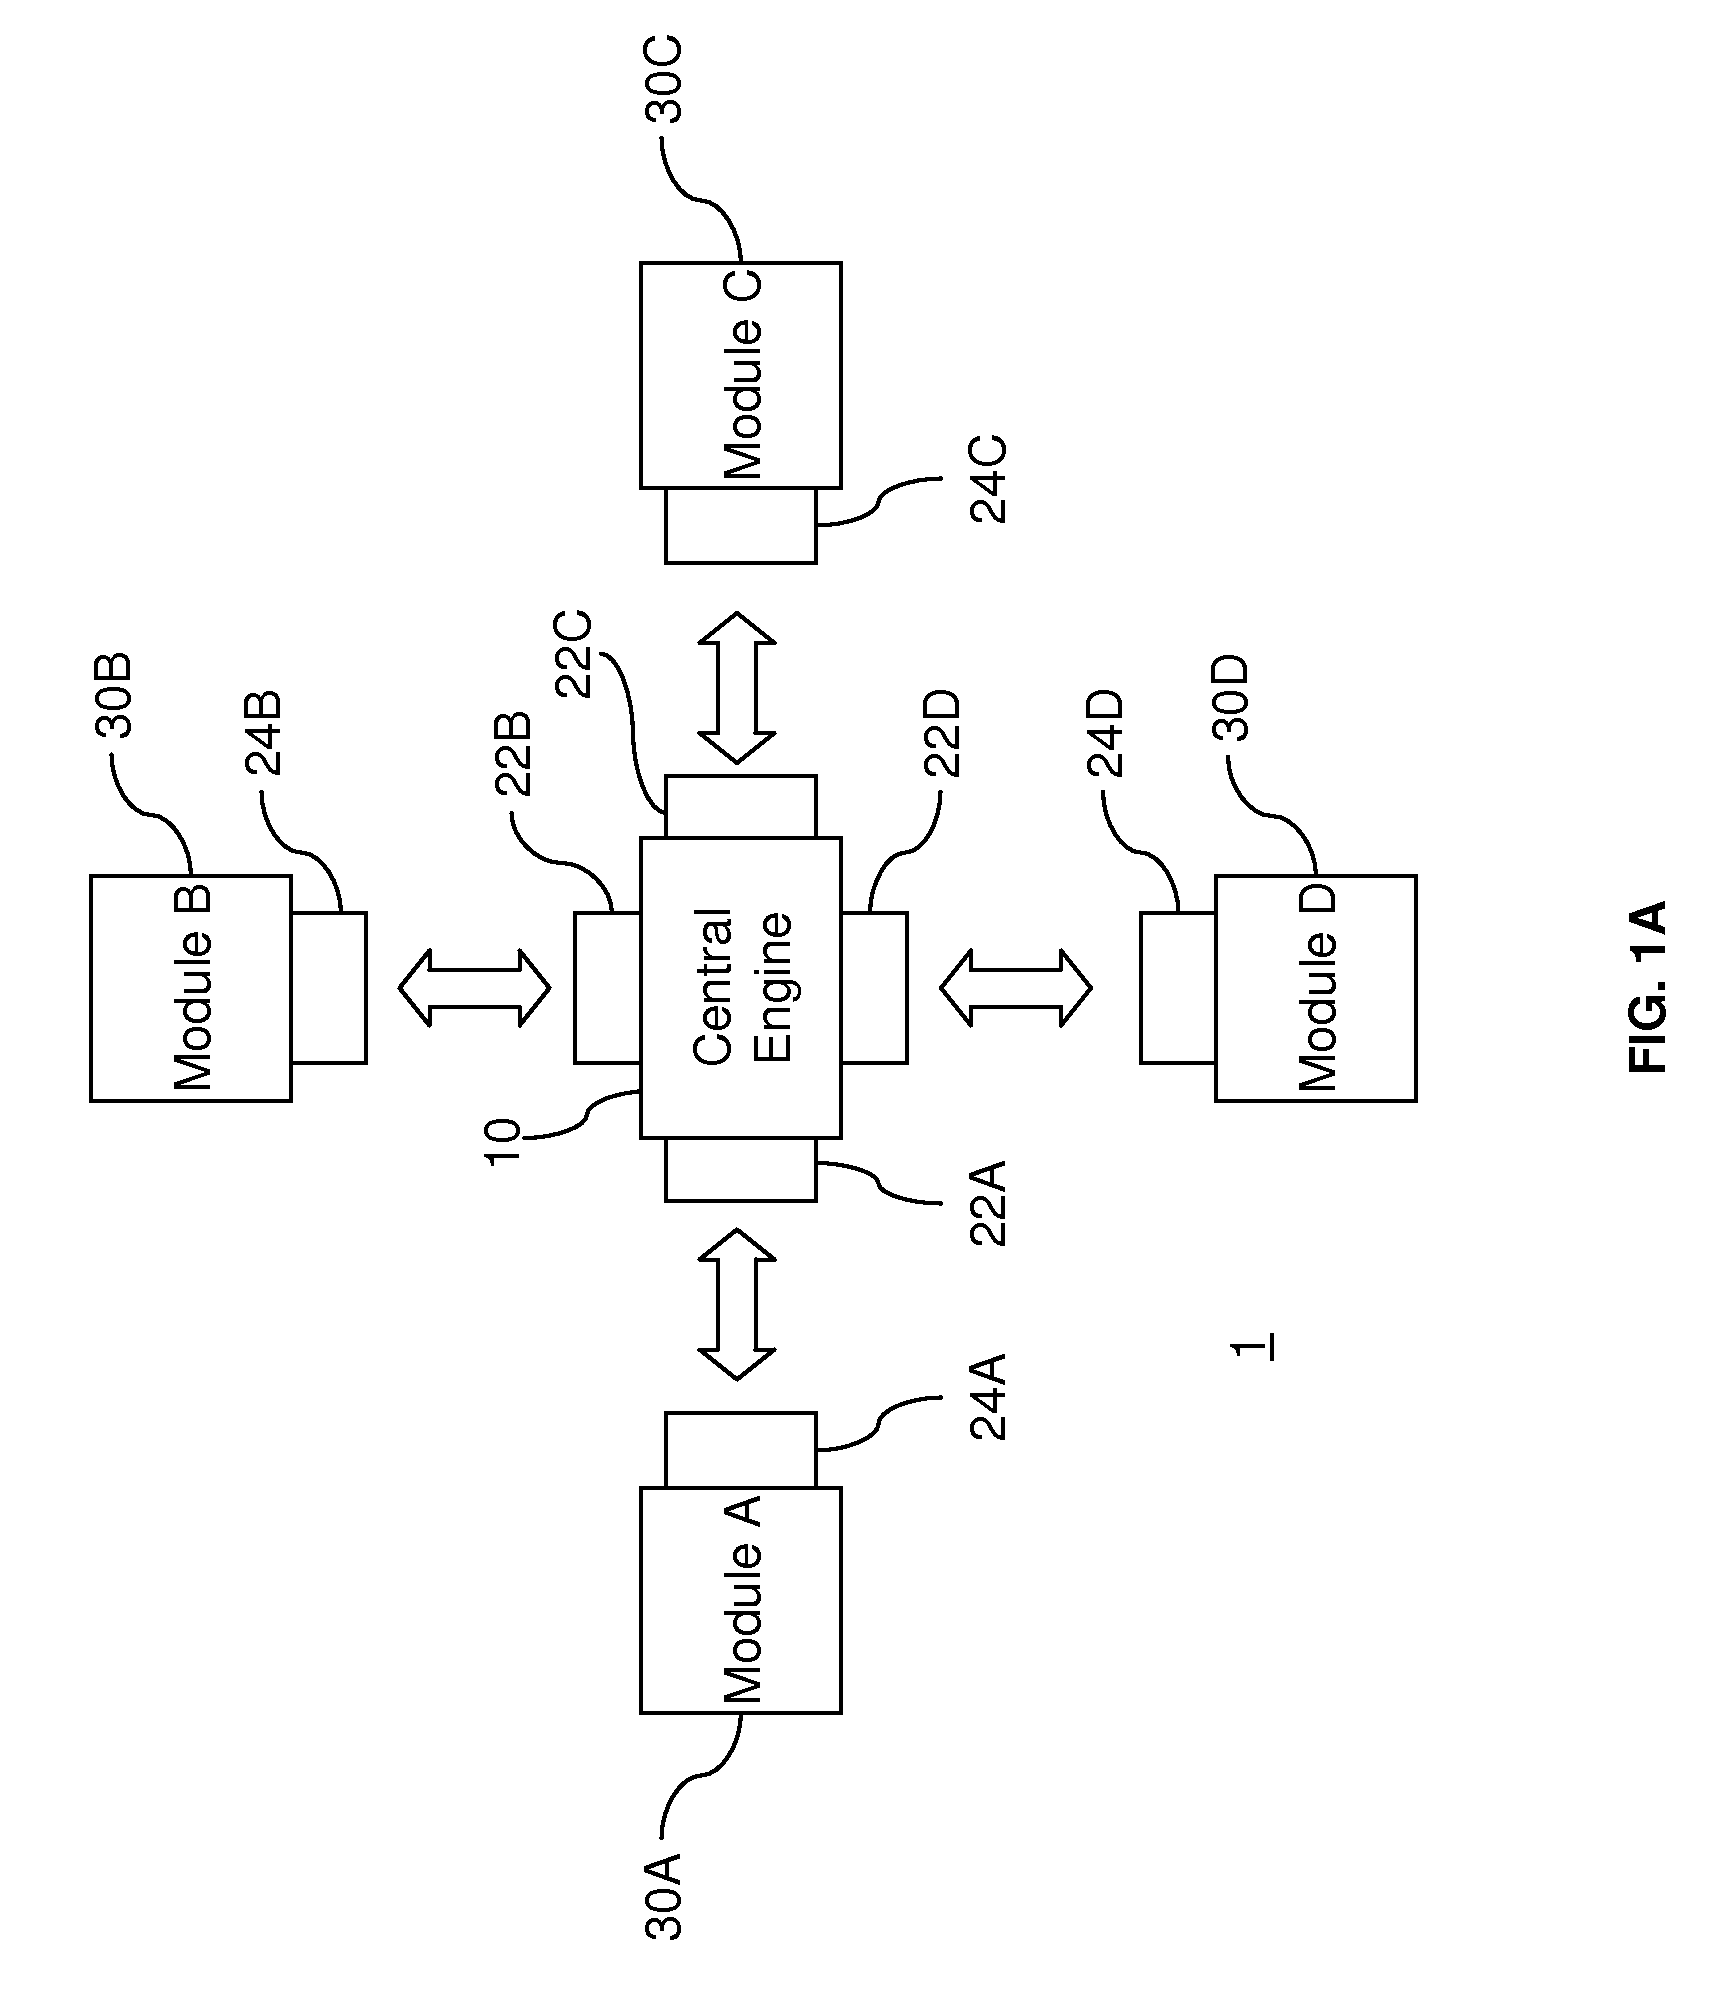 Architecture for field upgrade of a health monitoring system